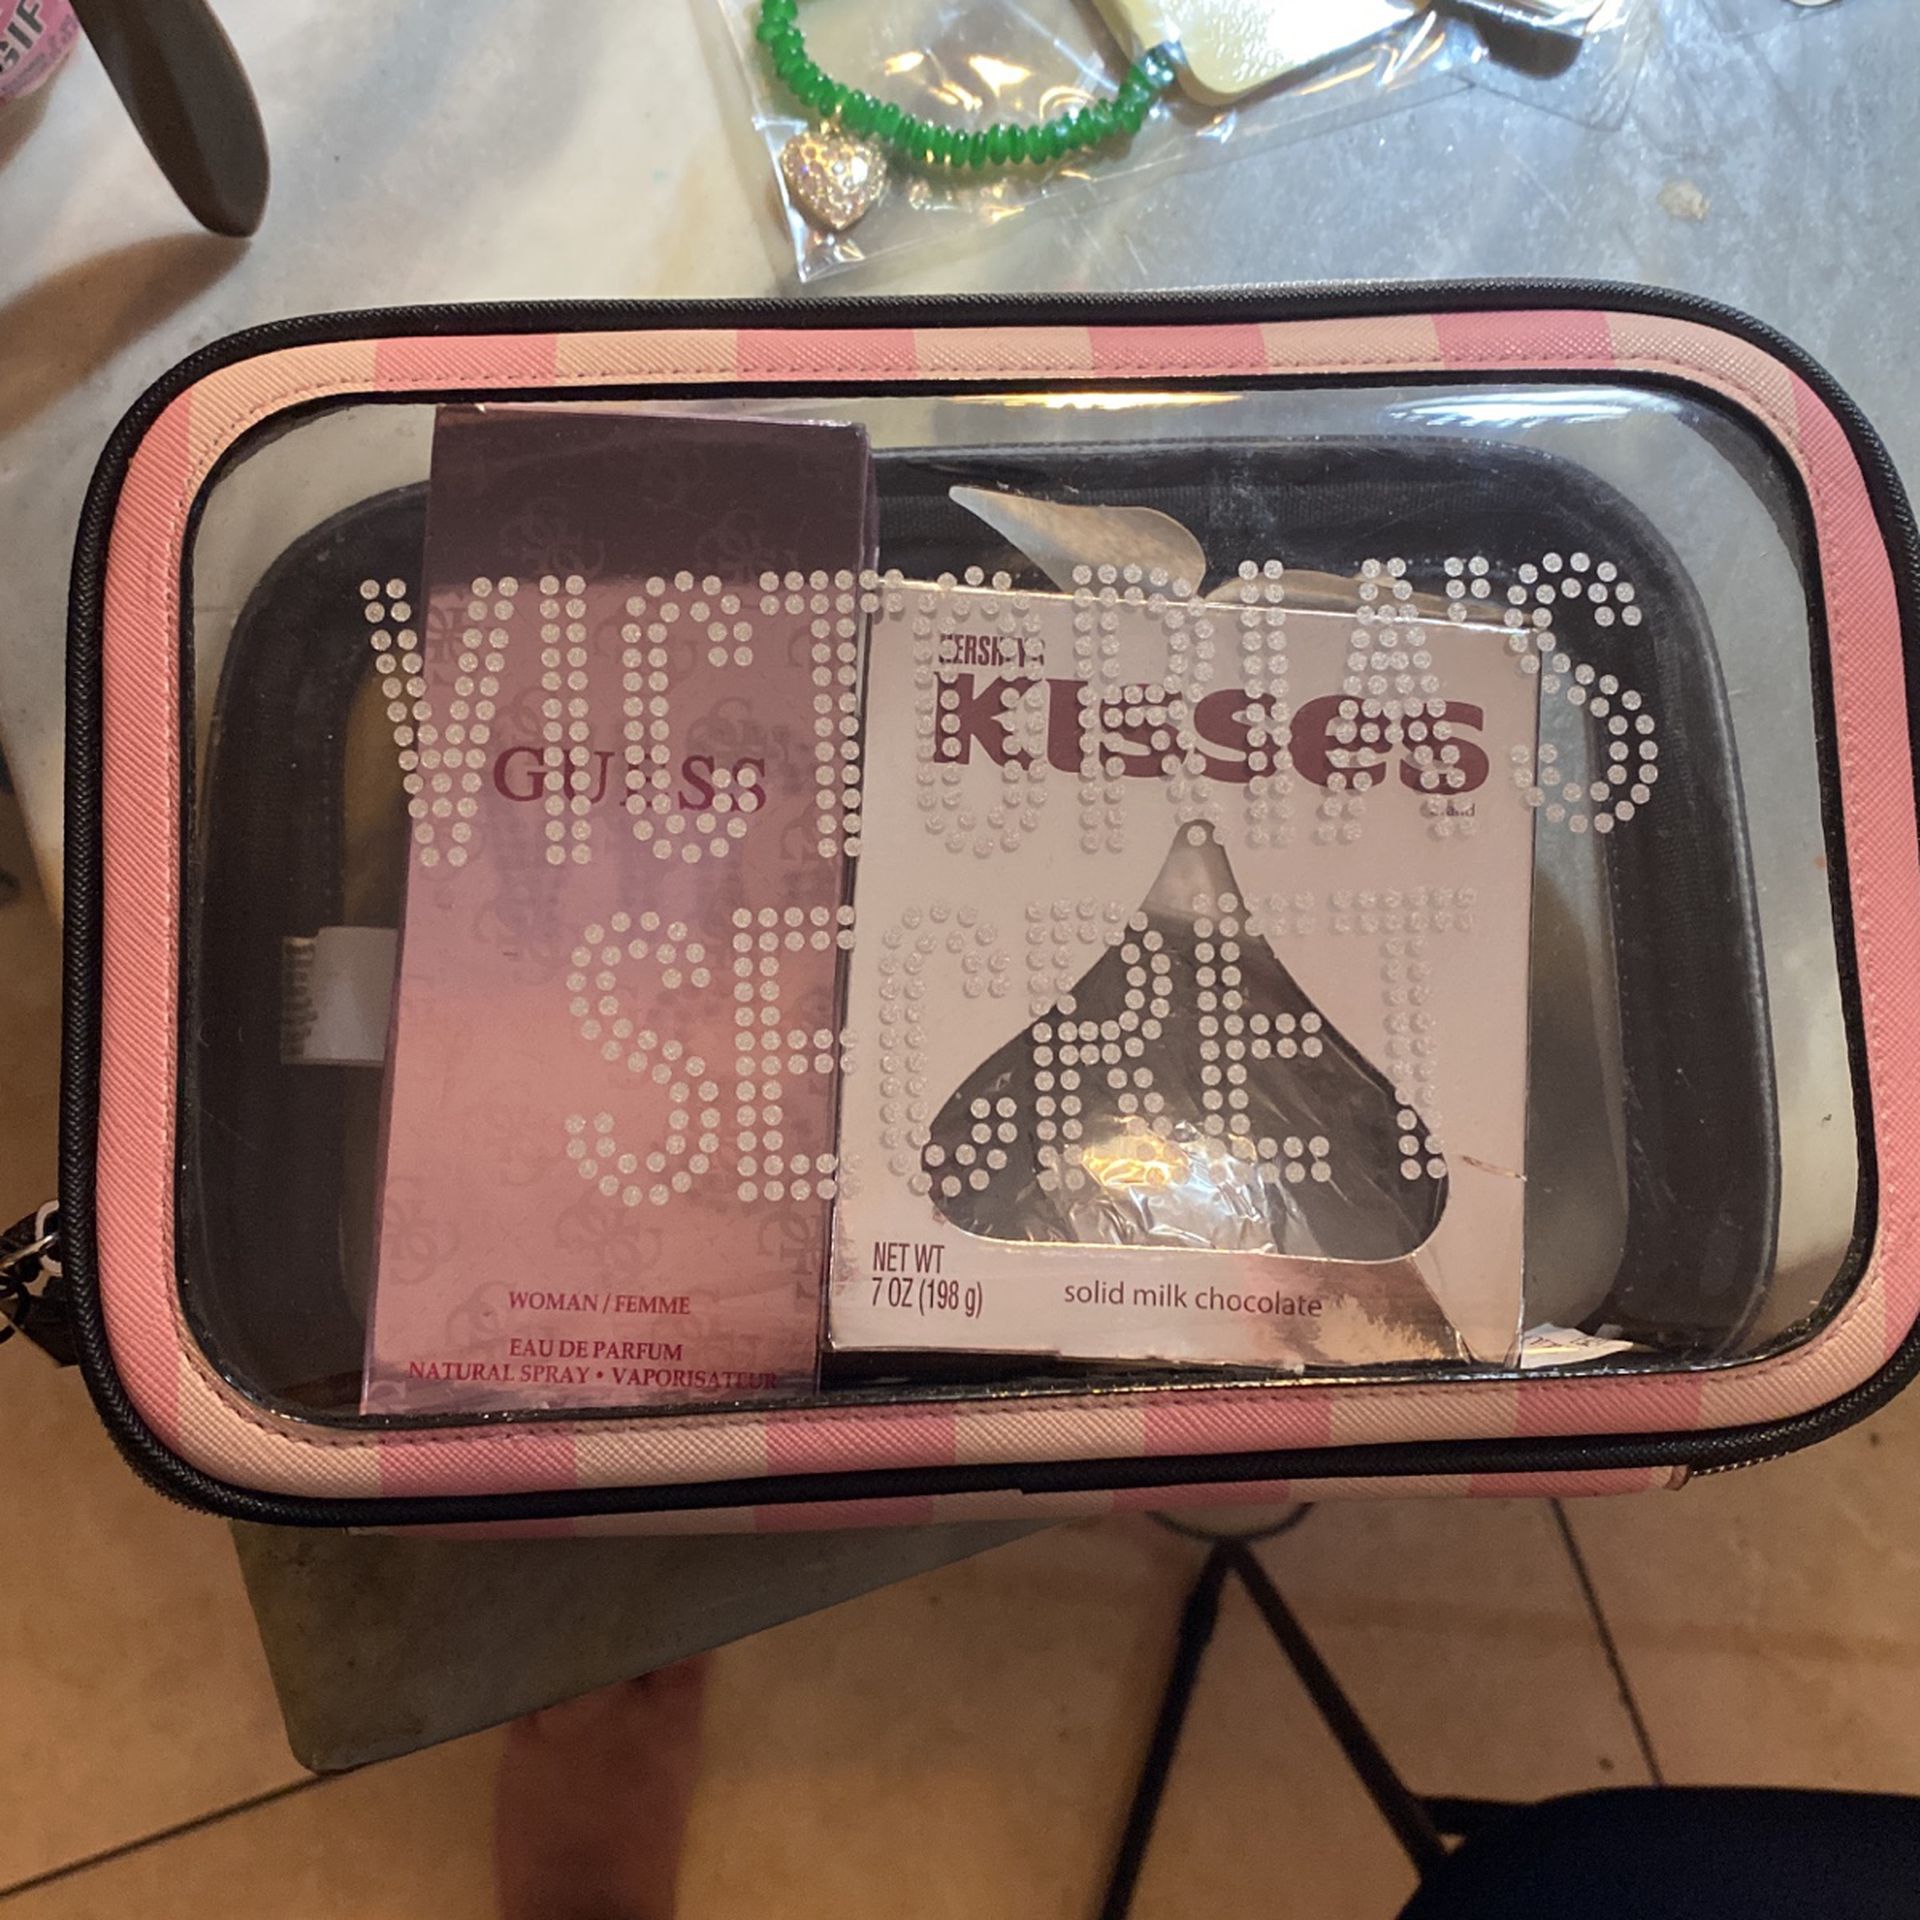 Victoria Secret Bag With Guess Perfume And Hershey’s Chocolate